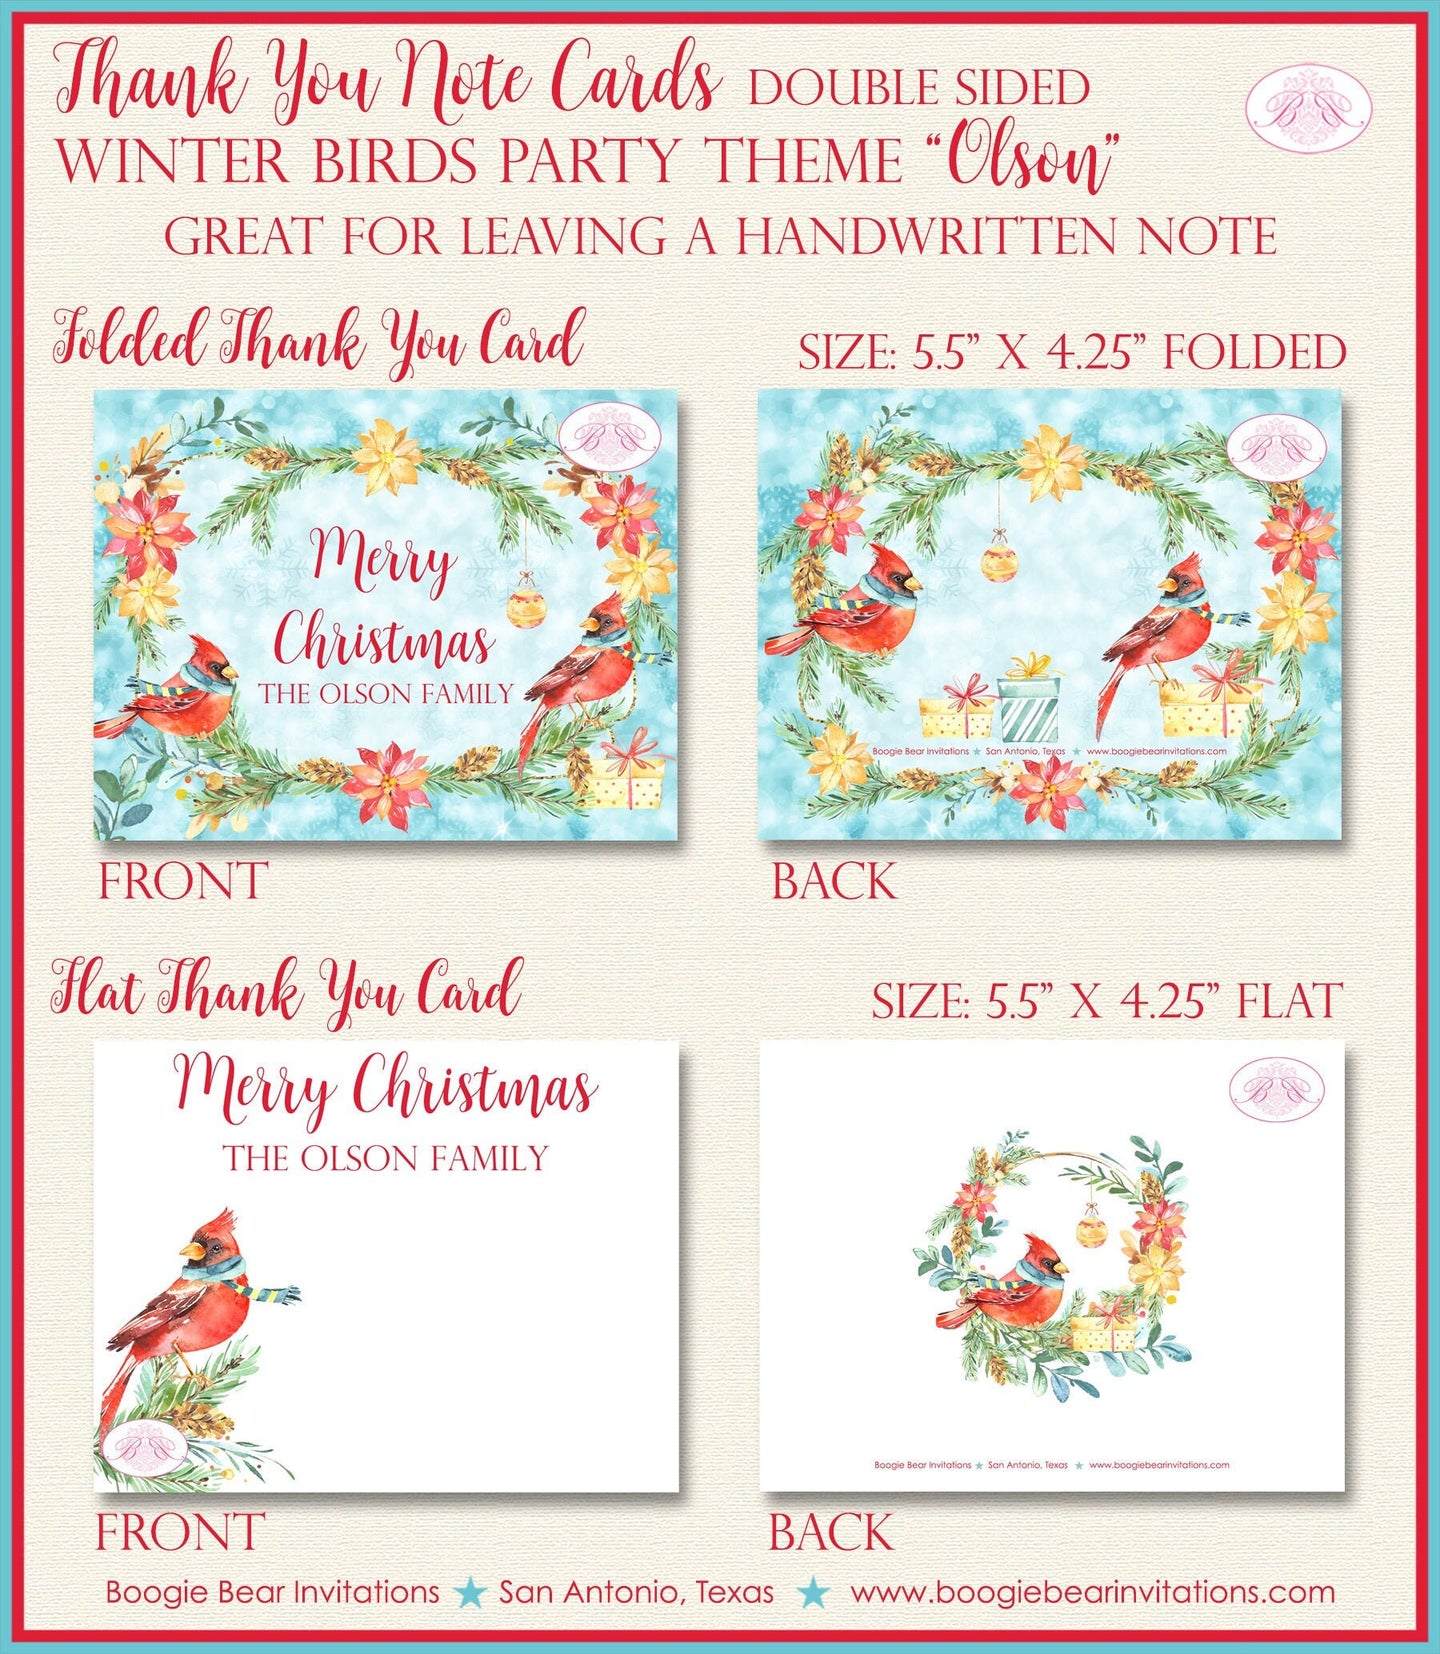 Red Cardinal Bird Party Thank You Cards Flat Folded Note Christmas Winter Tree Ornament Present Boogie Bear Invitations Olson Theme Printed